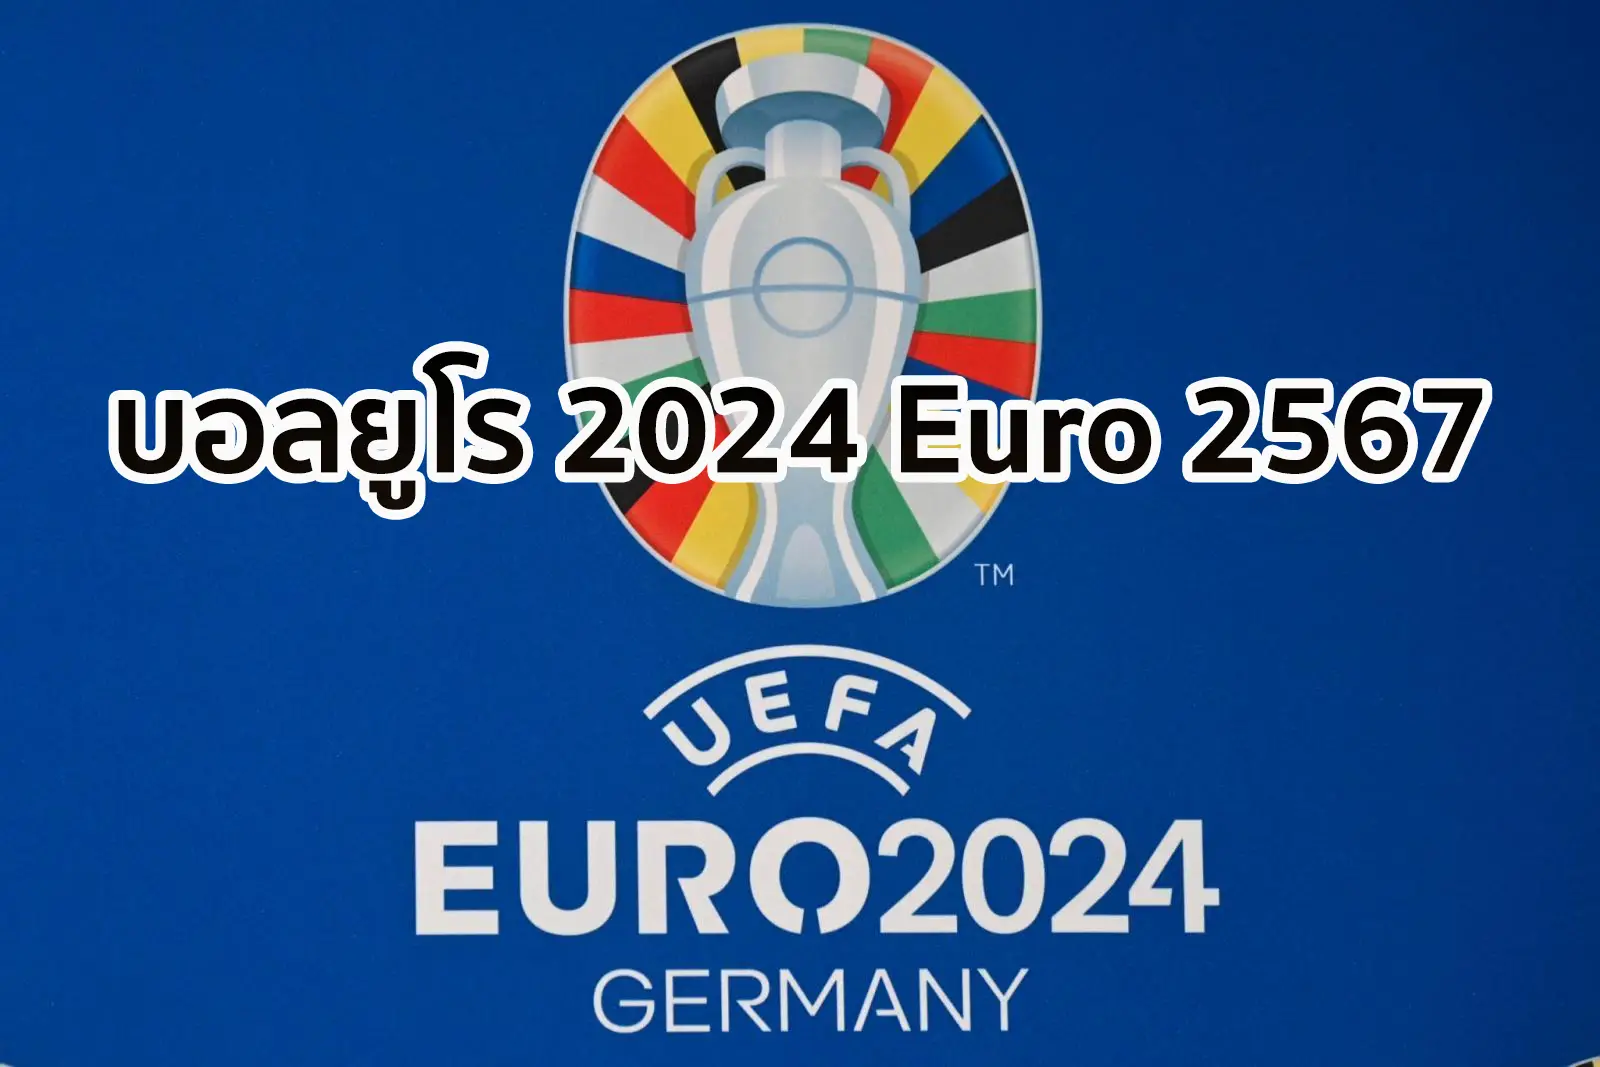 You are currently viewing บอลยูโร 2024 ฟุตบอล ยูโร 2567 (Euro 2024)